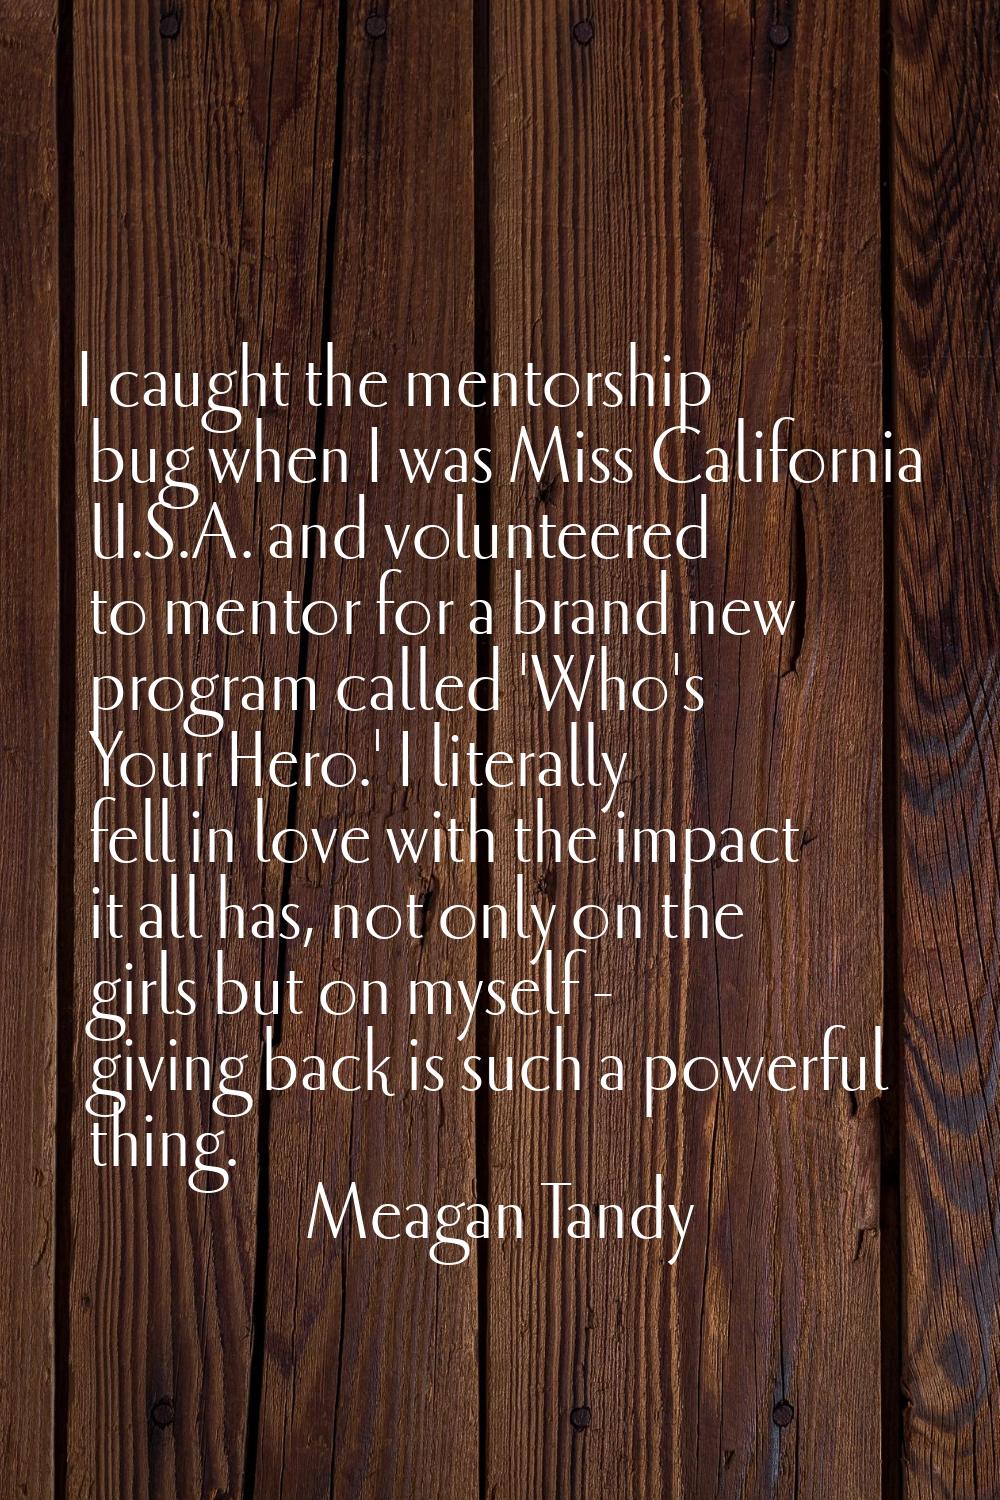 I caught the mentorship bug when I was Miss California U.S.A. and volunteered to mentor for a brand